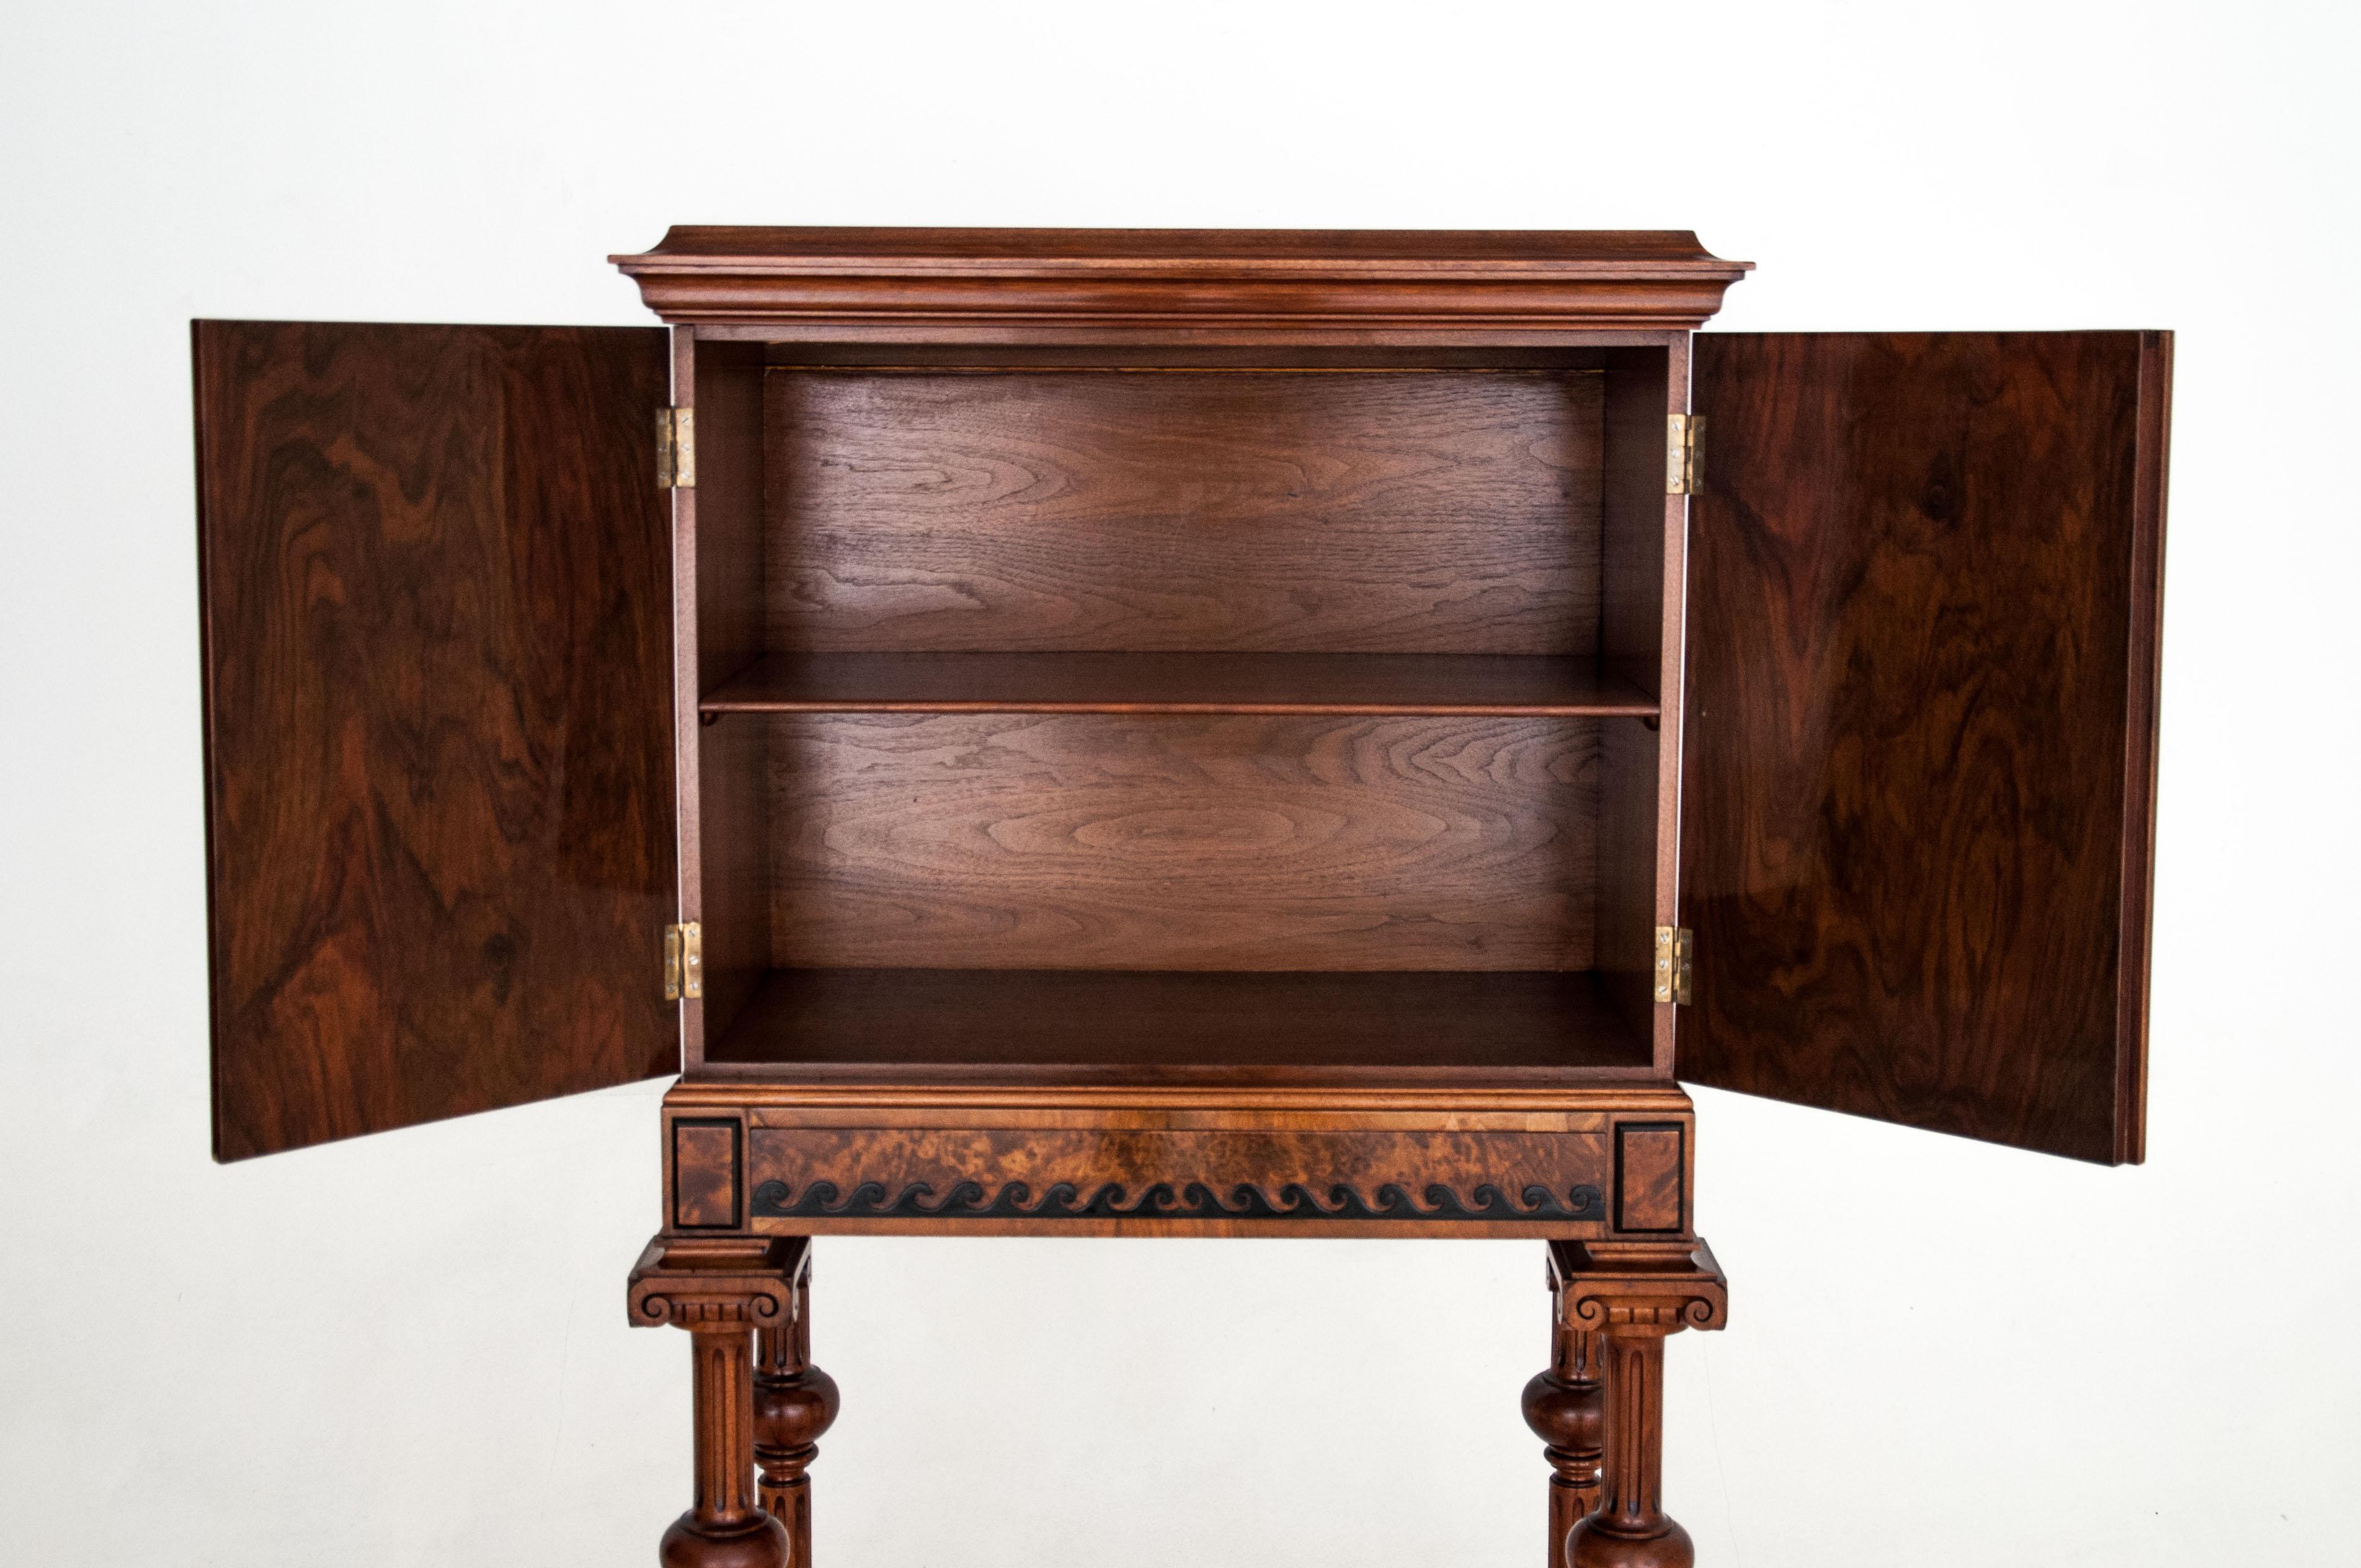 French Bar Walnut Empire Style Cabinet from circa 1870